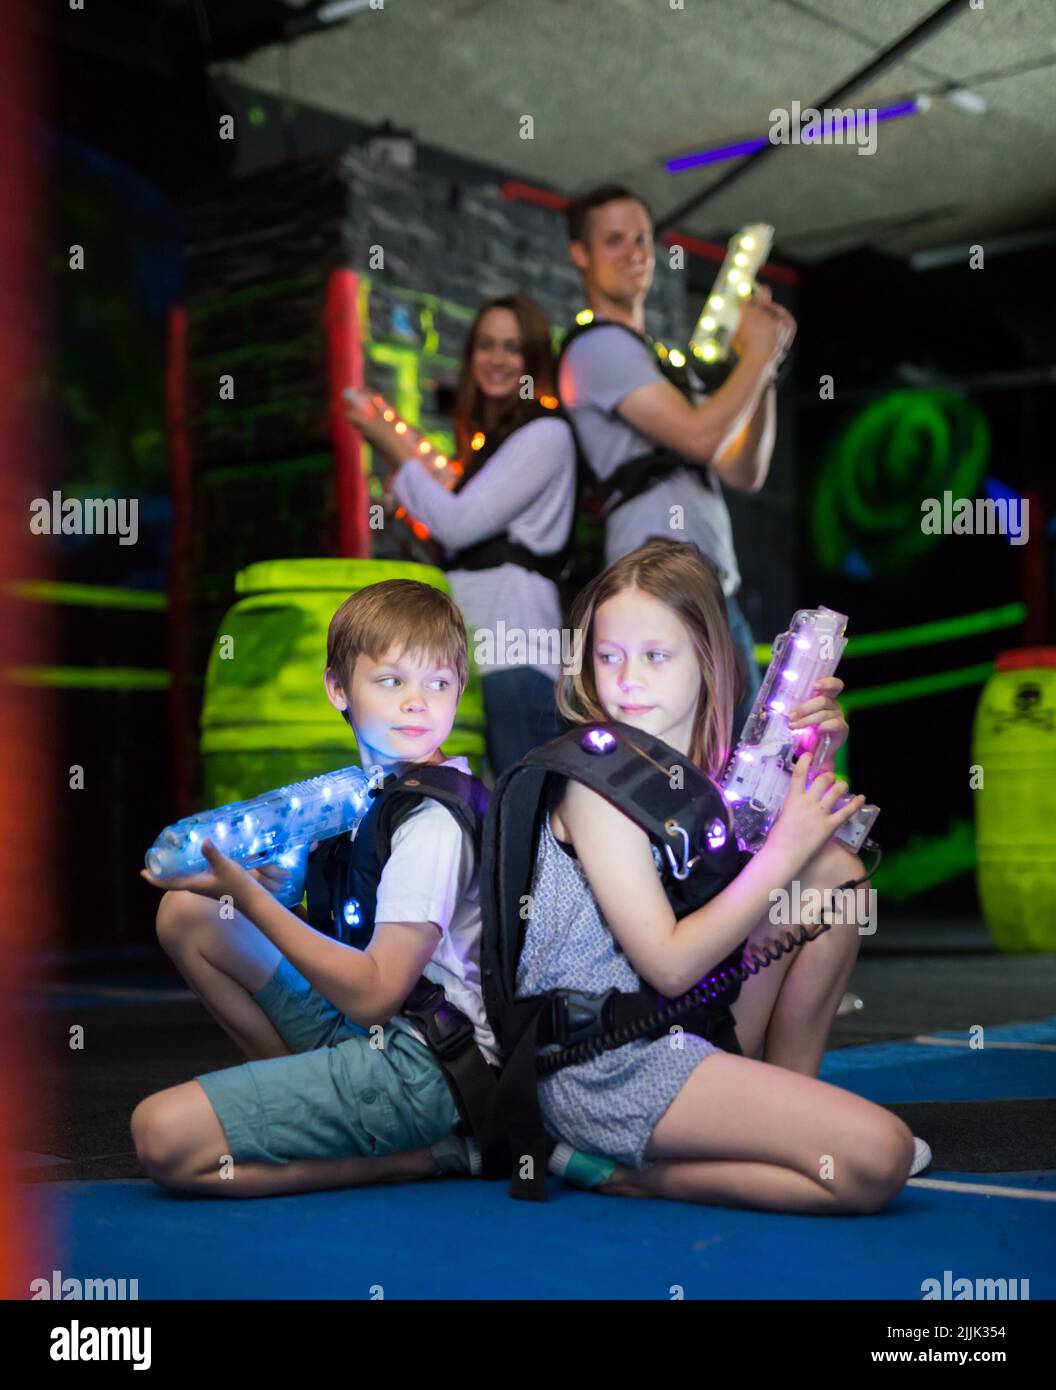 Kids sitting back to back with laser guns Stock Photo